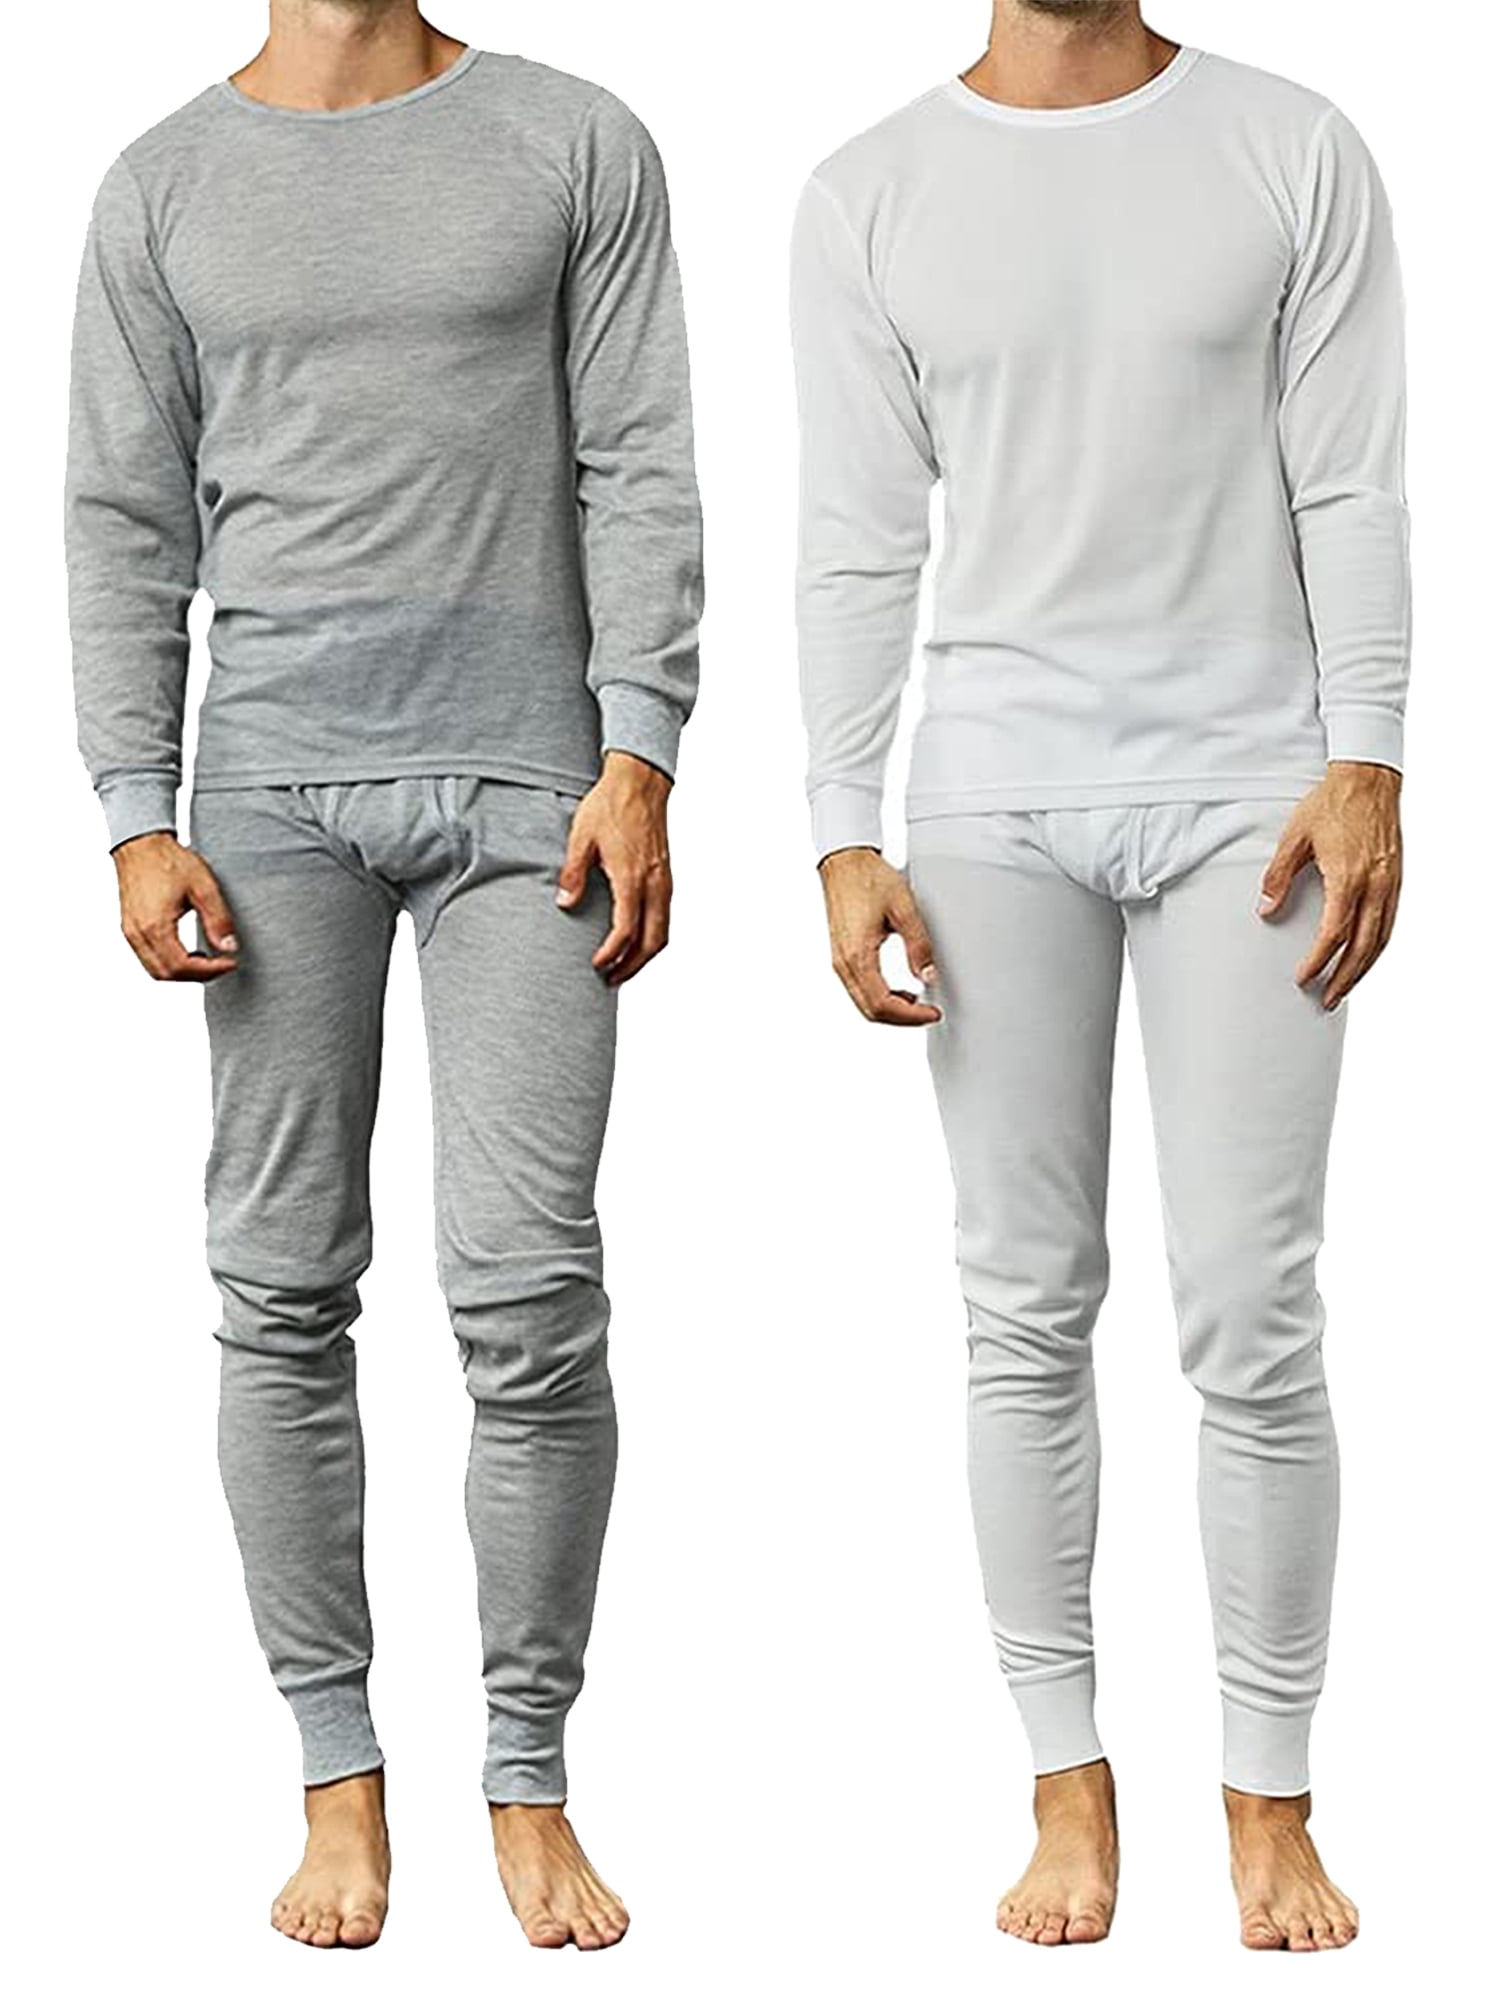 Galaxy By Harvic Men's 4-Piece Lightweight Thermal Set Of Both A Thermal  Top And Bottom (2-Full Sets)(S-2XL) 